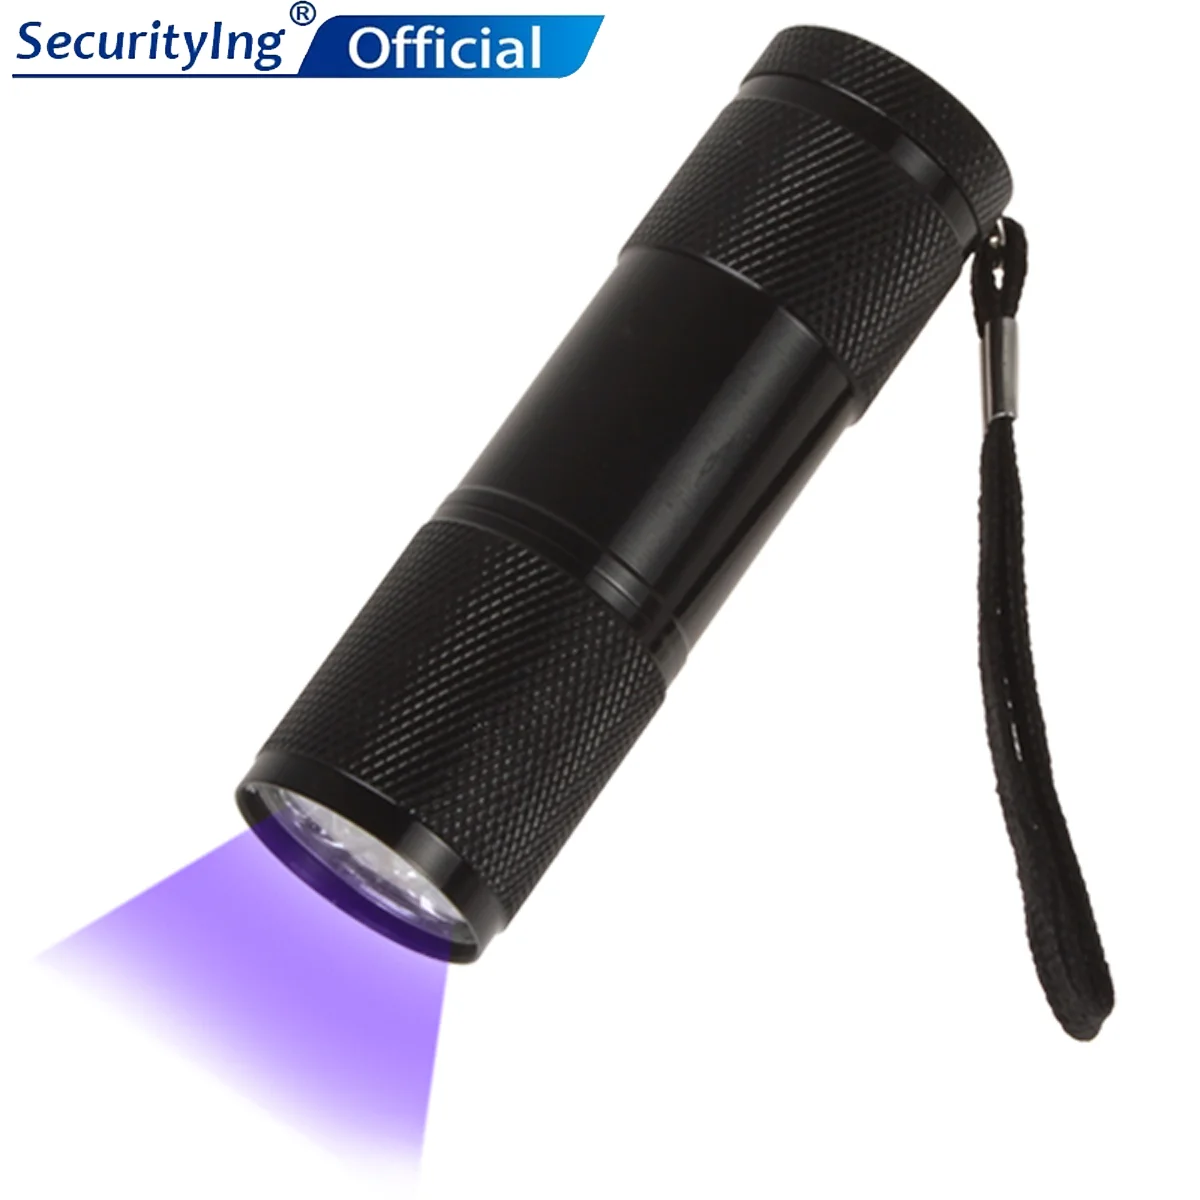 

SecurityIng 3W 400Lm LED UV 395NM Counterfeit Light Fluorescent Agent Detection Light Ultraviolet Flashlight for Money Detector